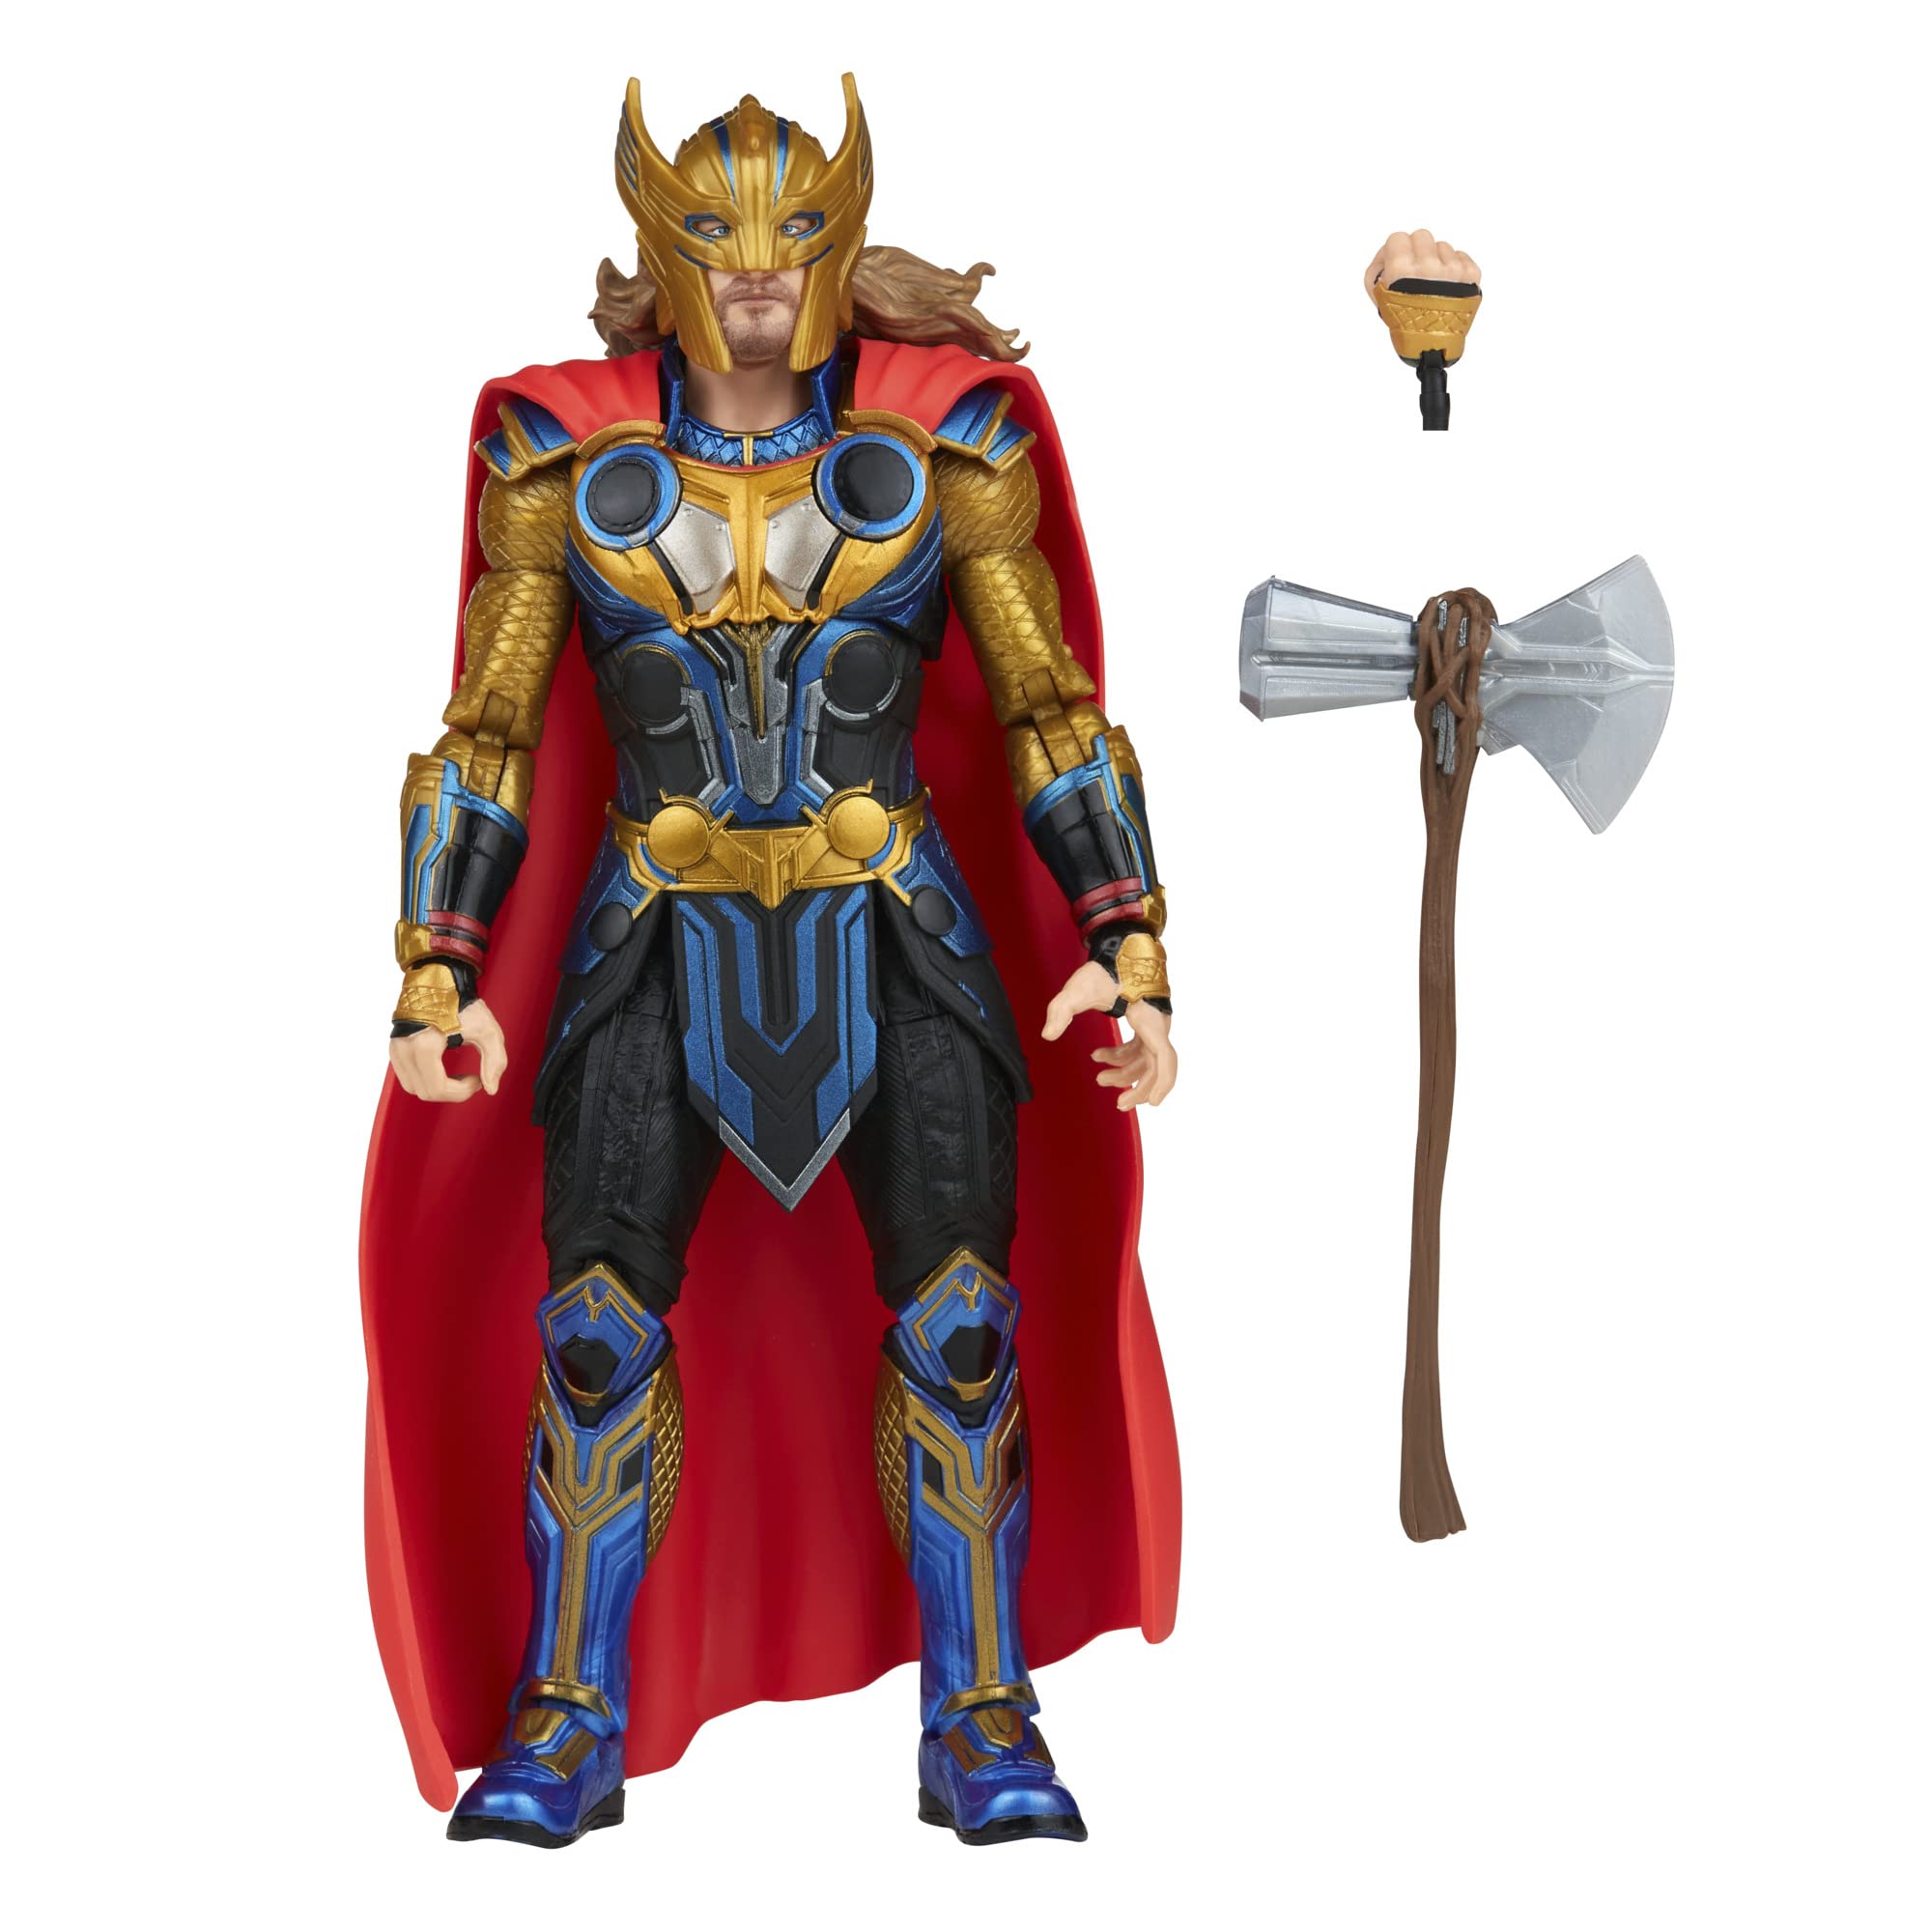 6" Marvel Legends Action Figures w/ Accessories: Thor $9, Nakia $8 + Free Shipping w/ Prime or on $25+